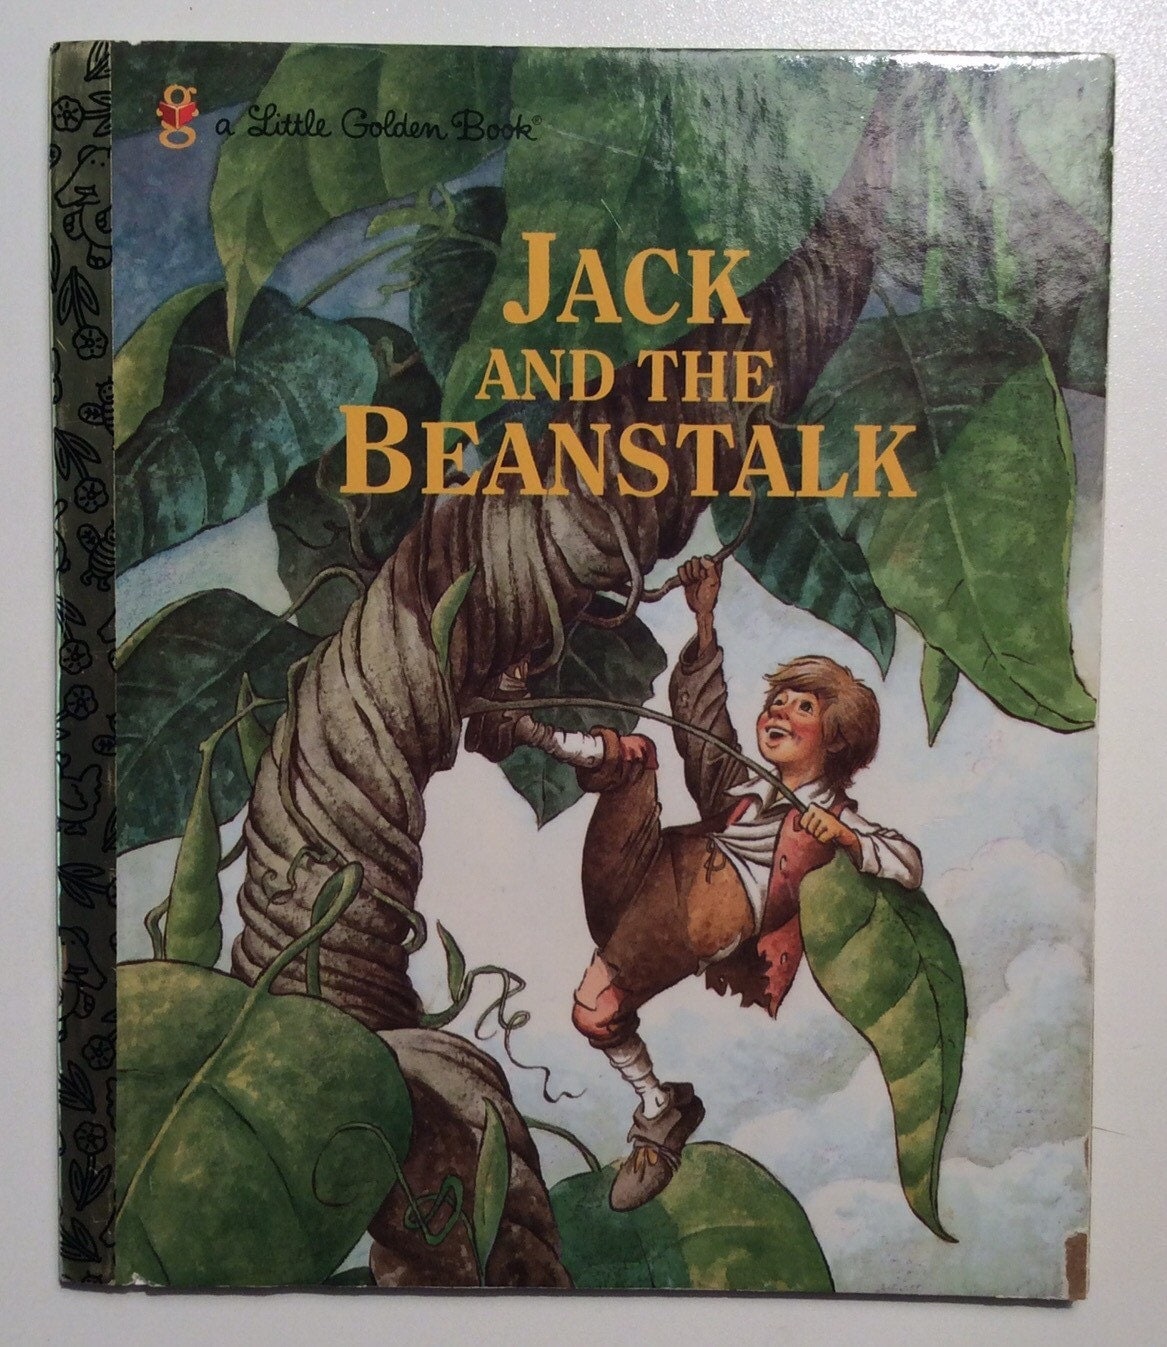 Golden books jack and the beanstalk pc